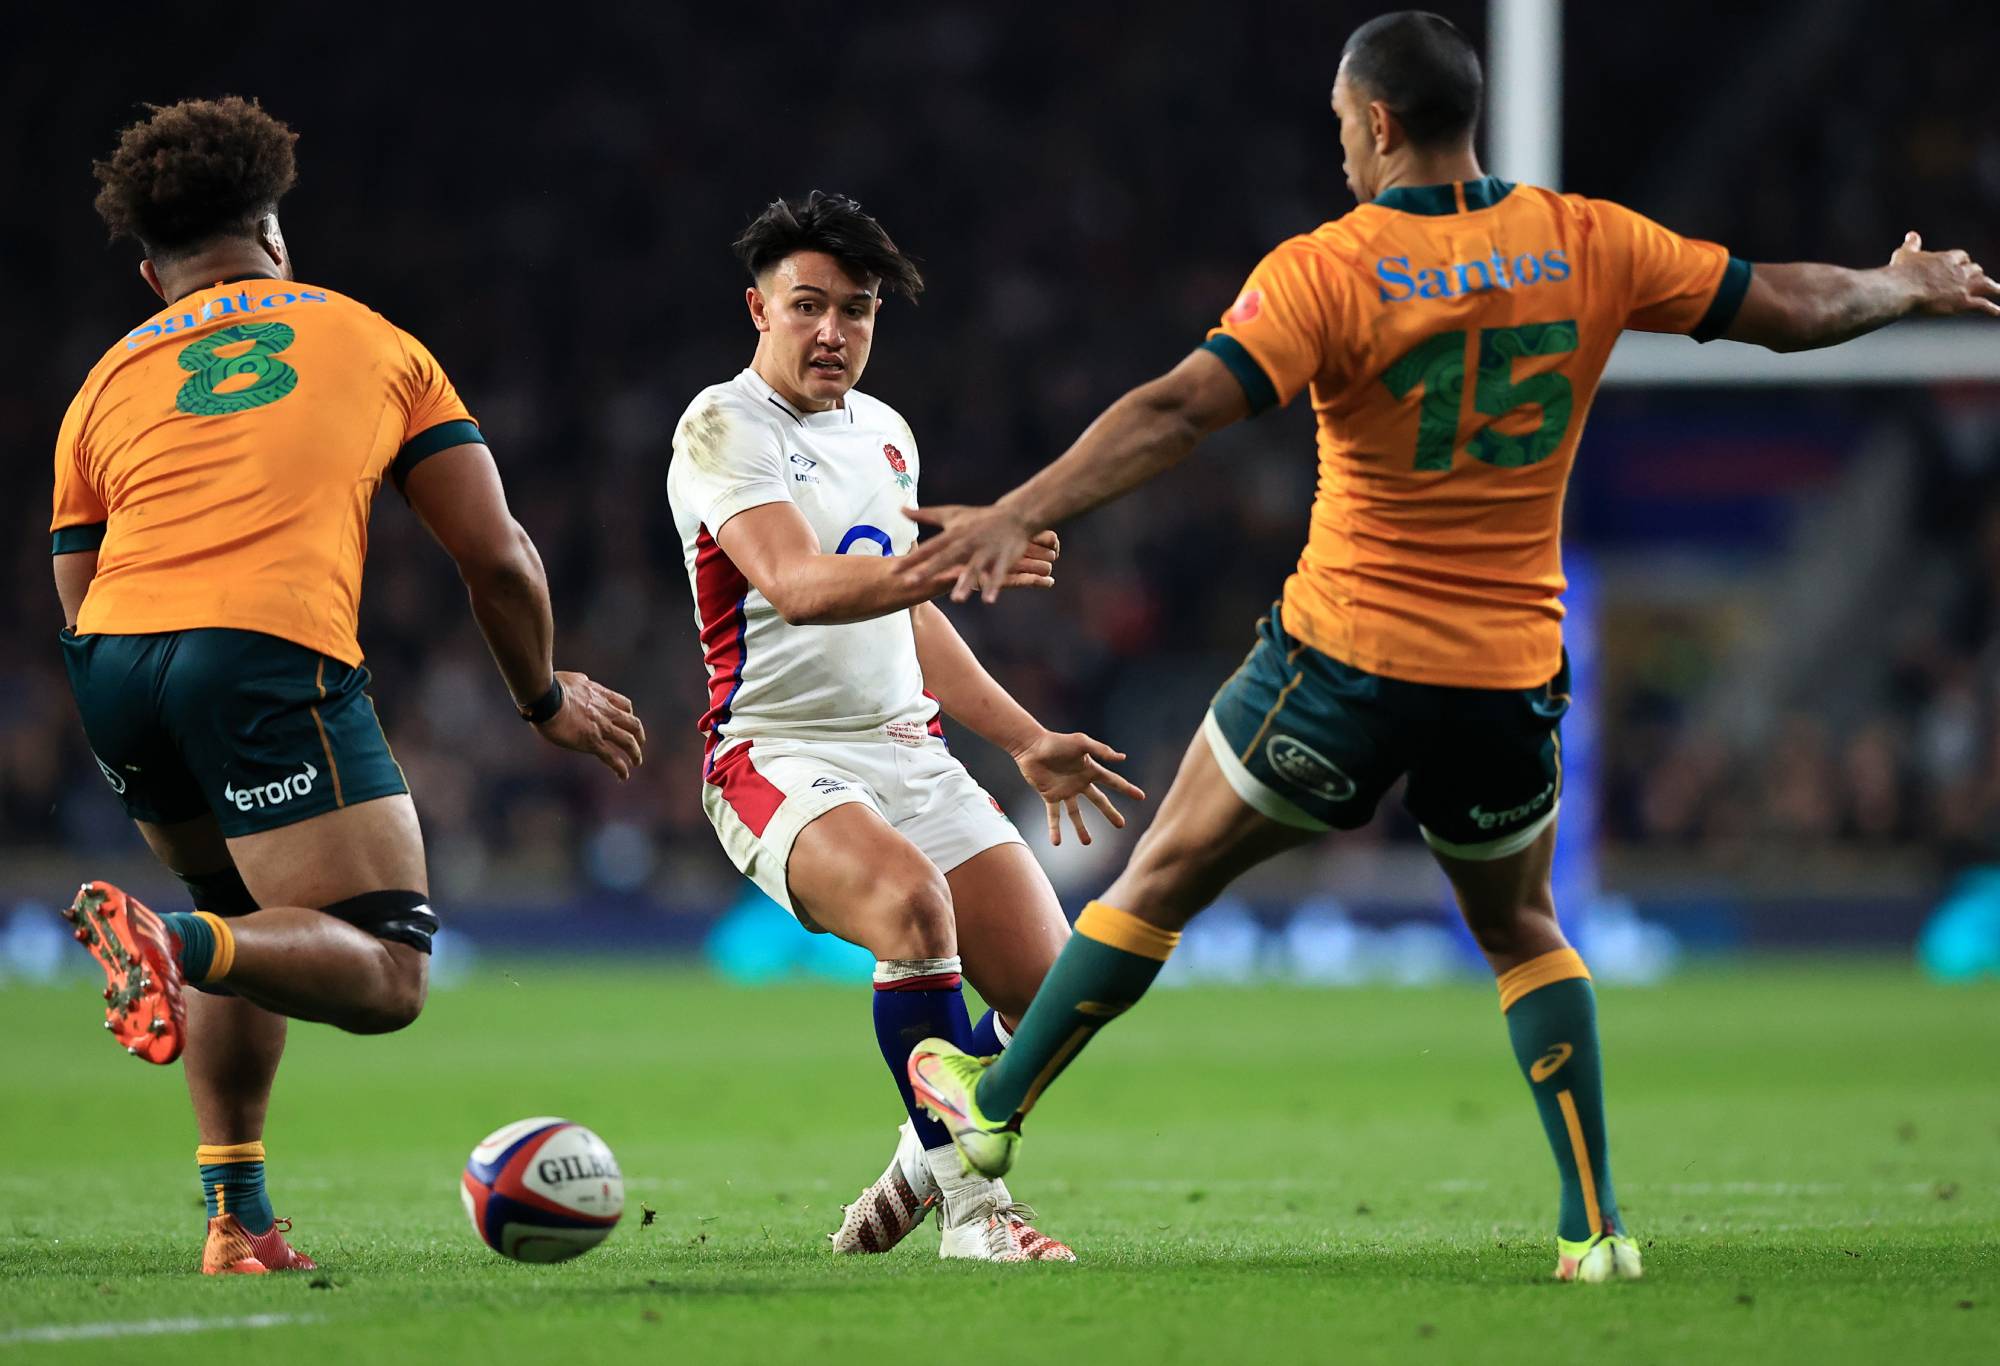 Marcus Smith of England kicks past Rob Valetini and Kurtley Beale of Australia during the Autumn Nations Series match between England and Australia at Twickenham Stadium on November 13, 2021 in London, England. (Photo by David Rogers/Getty Images)